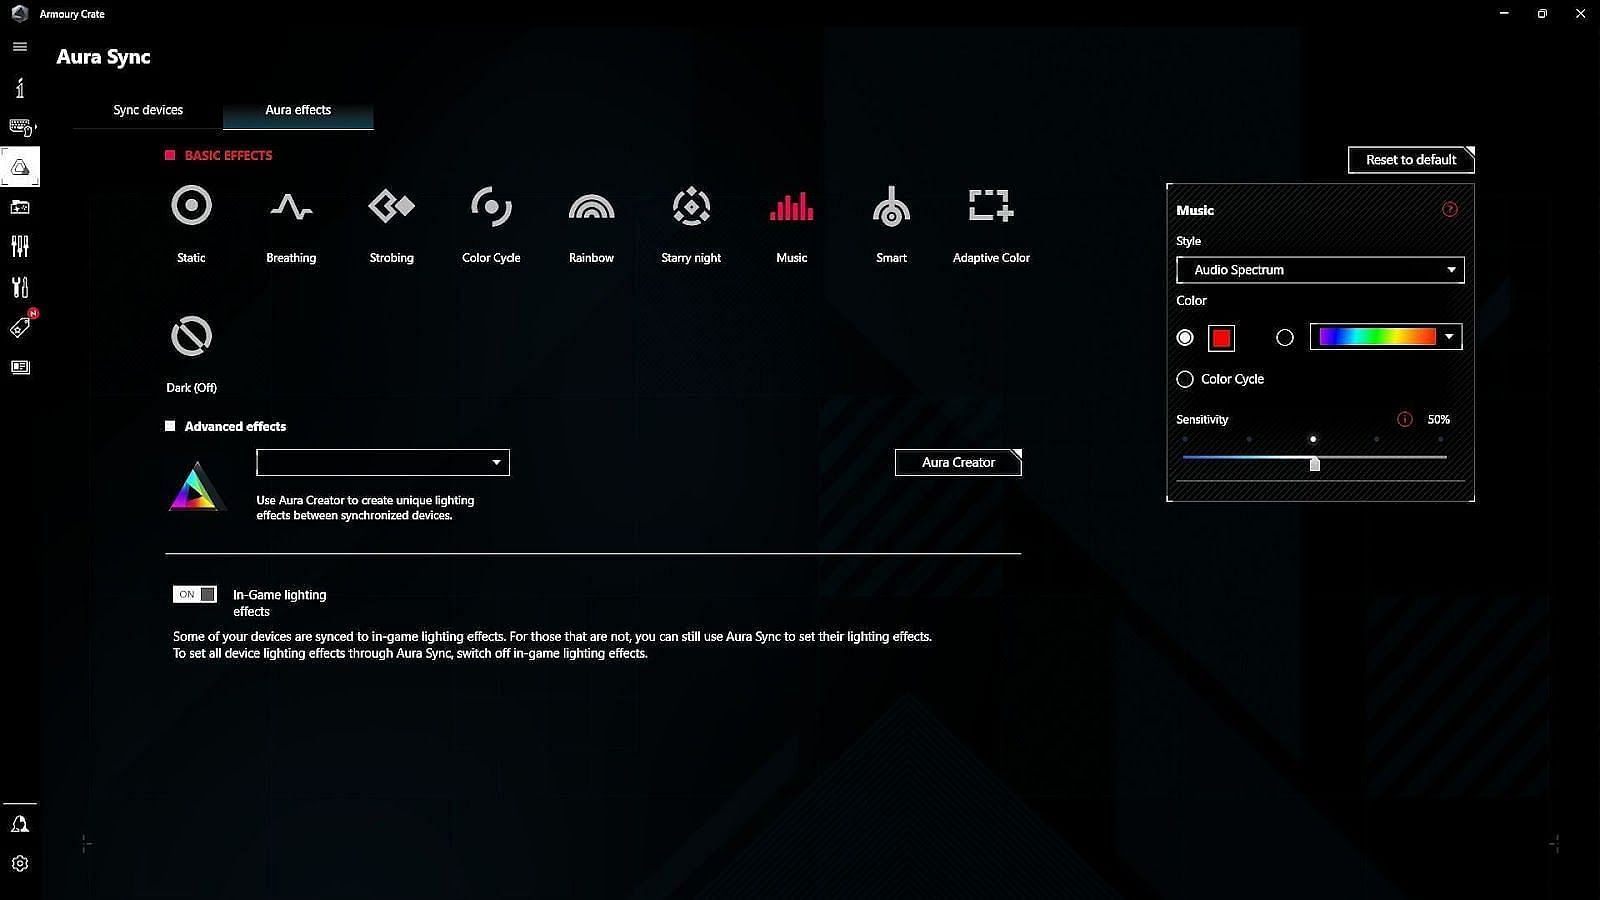 Aura Sync utility in the Armory Crate software (Image via Sportskeeda)